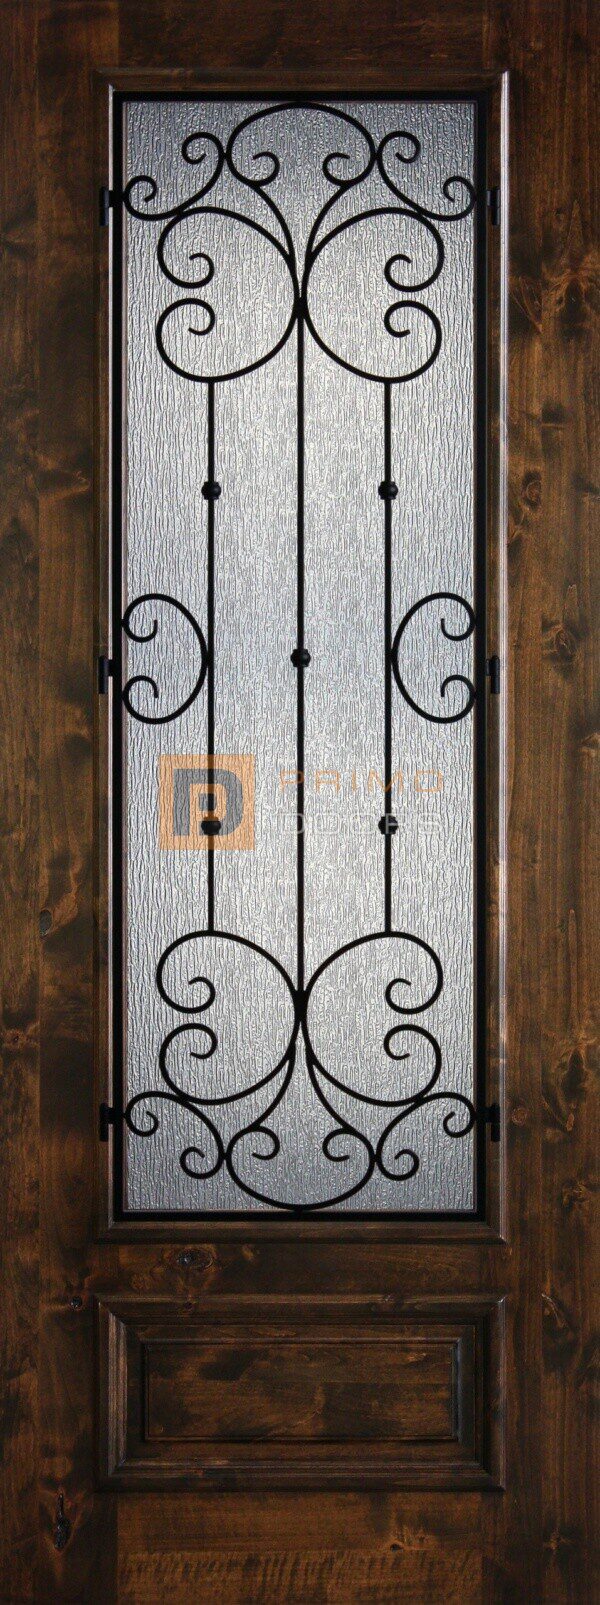 8′ 3/4 Lite Knotty Alder Decorative Glass with Iron Grill Single Iron Front Door – PD KA 3080-34 SANT